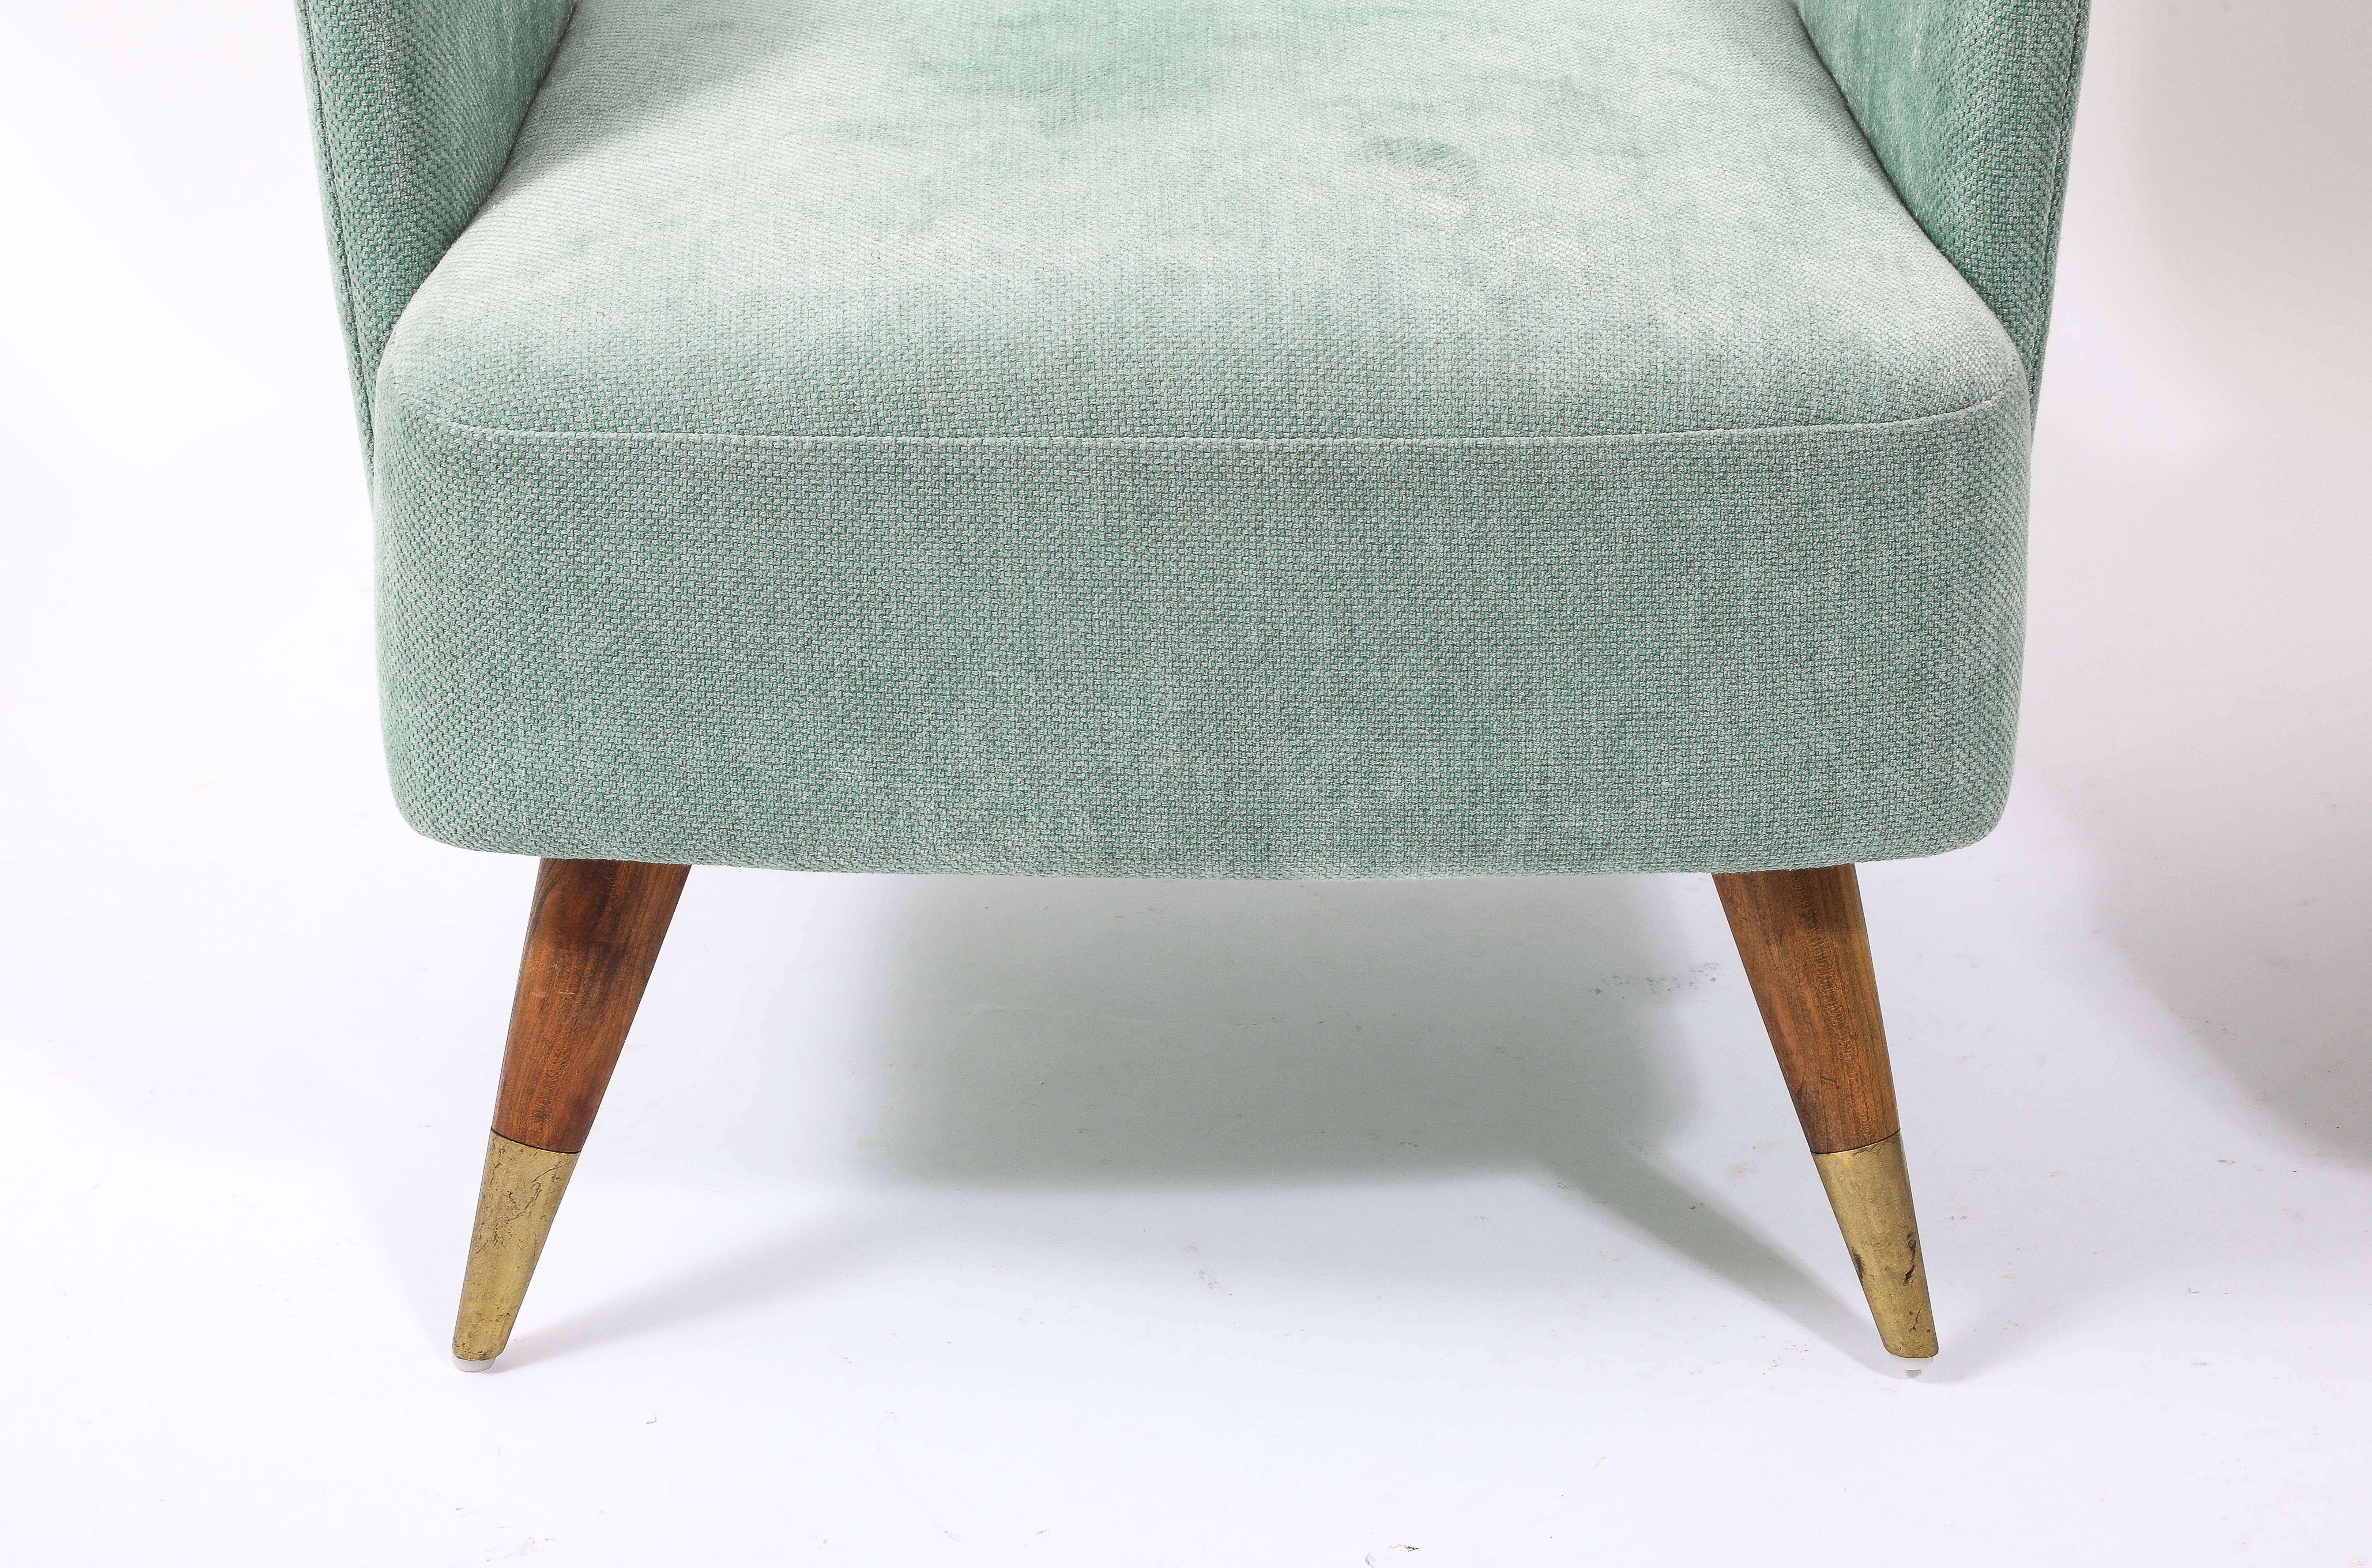 Pale Blue Tall Italian Wingchairs, Italy 1950's For Sale 6